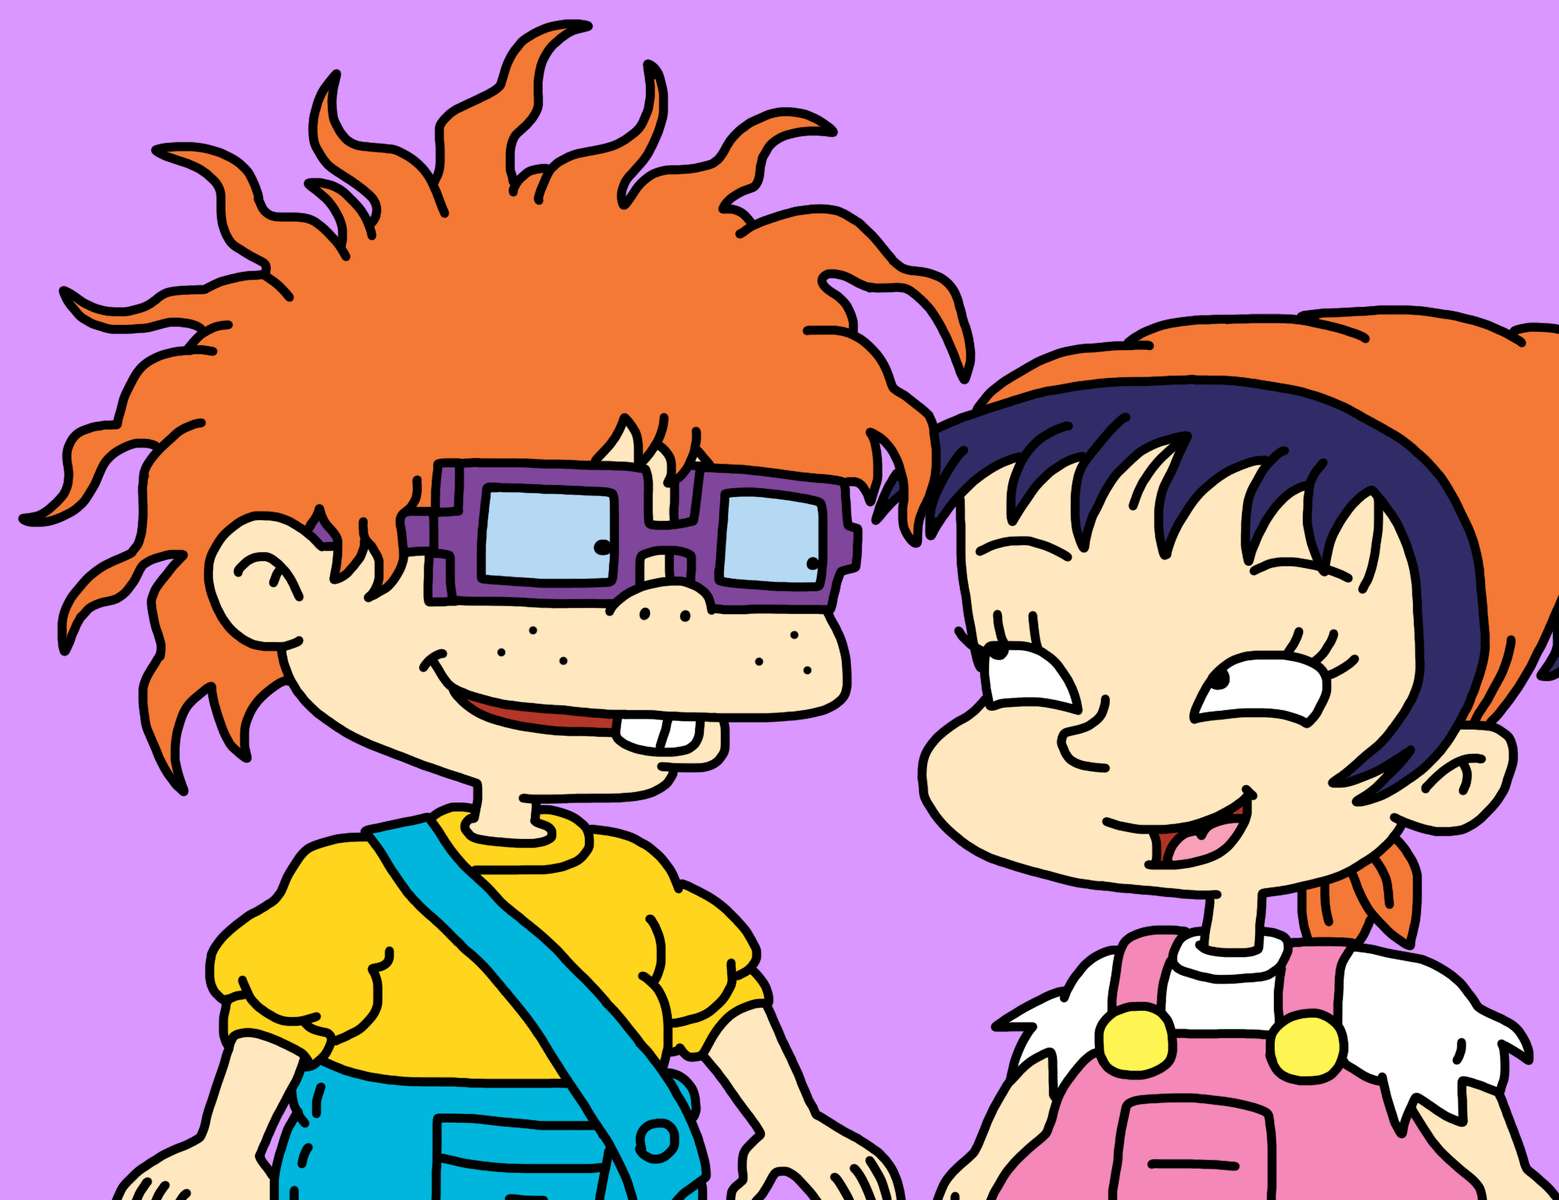 Chuckie e Kimi Finster❤️❤️❤️❤️❤️ puzzle online